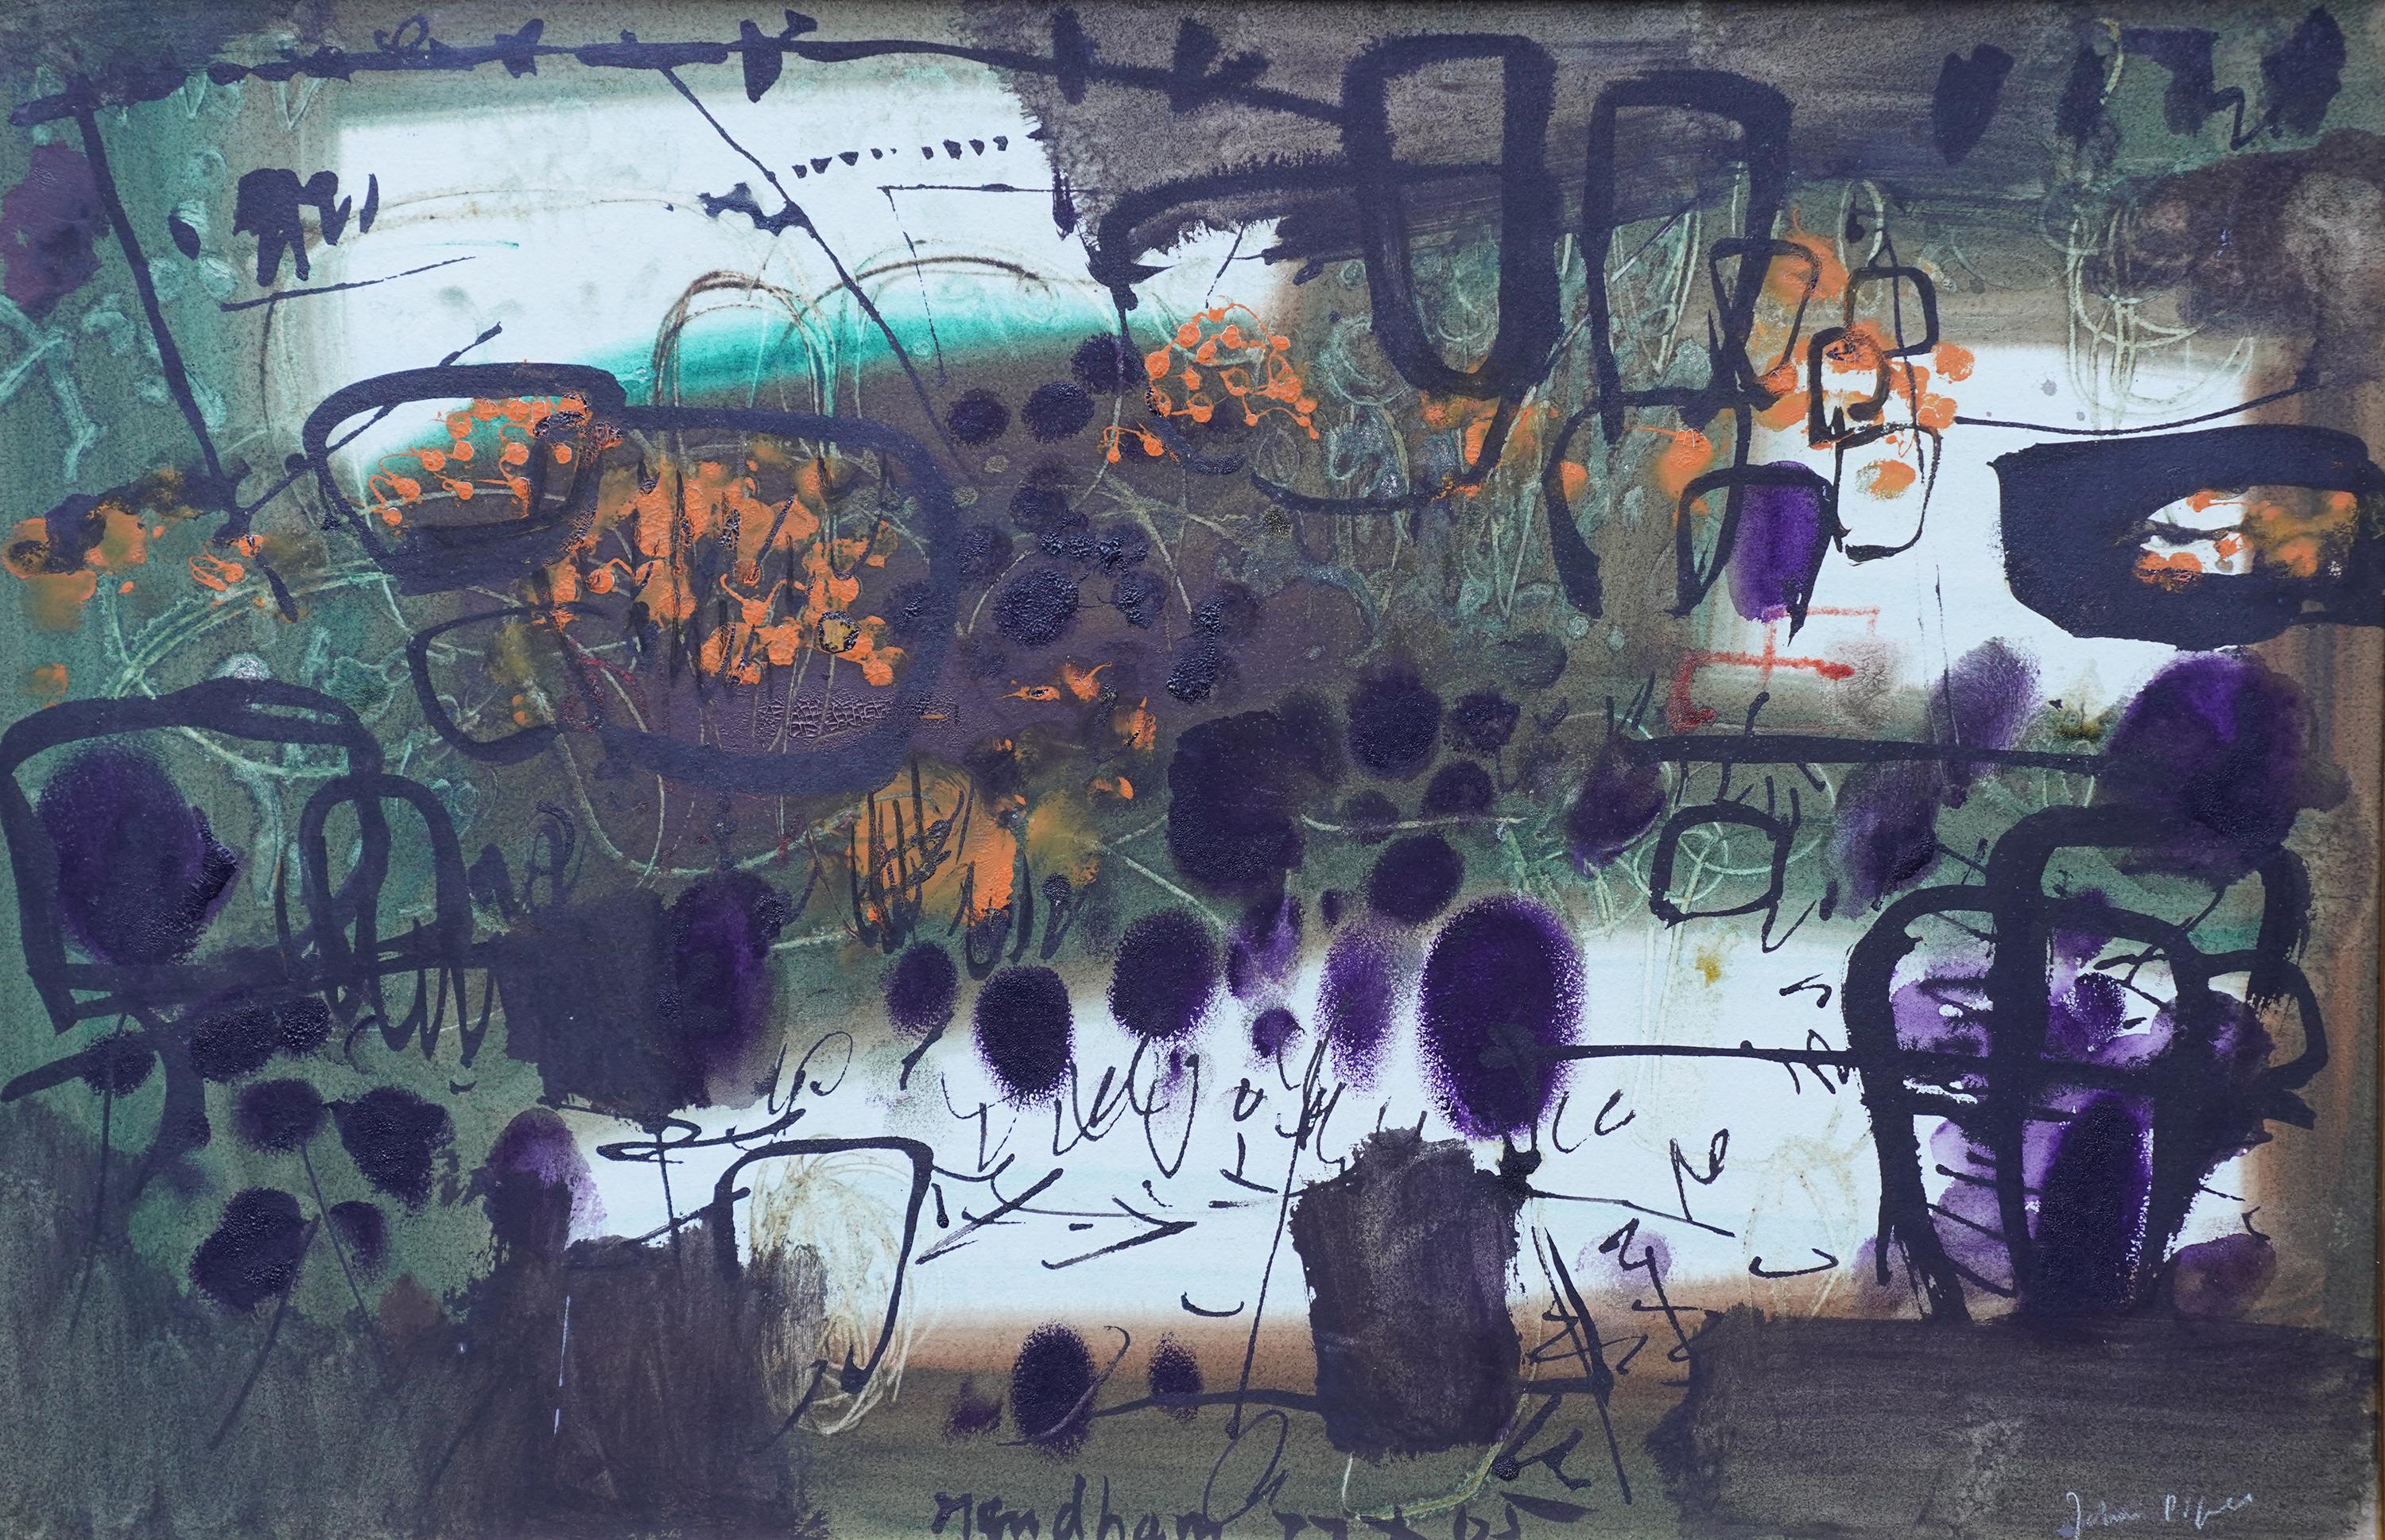 Abstract Landscape - Mendham Suffolk 1965 - British Abstract landscape painting - Art by John Piper